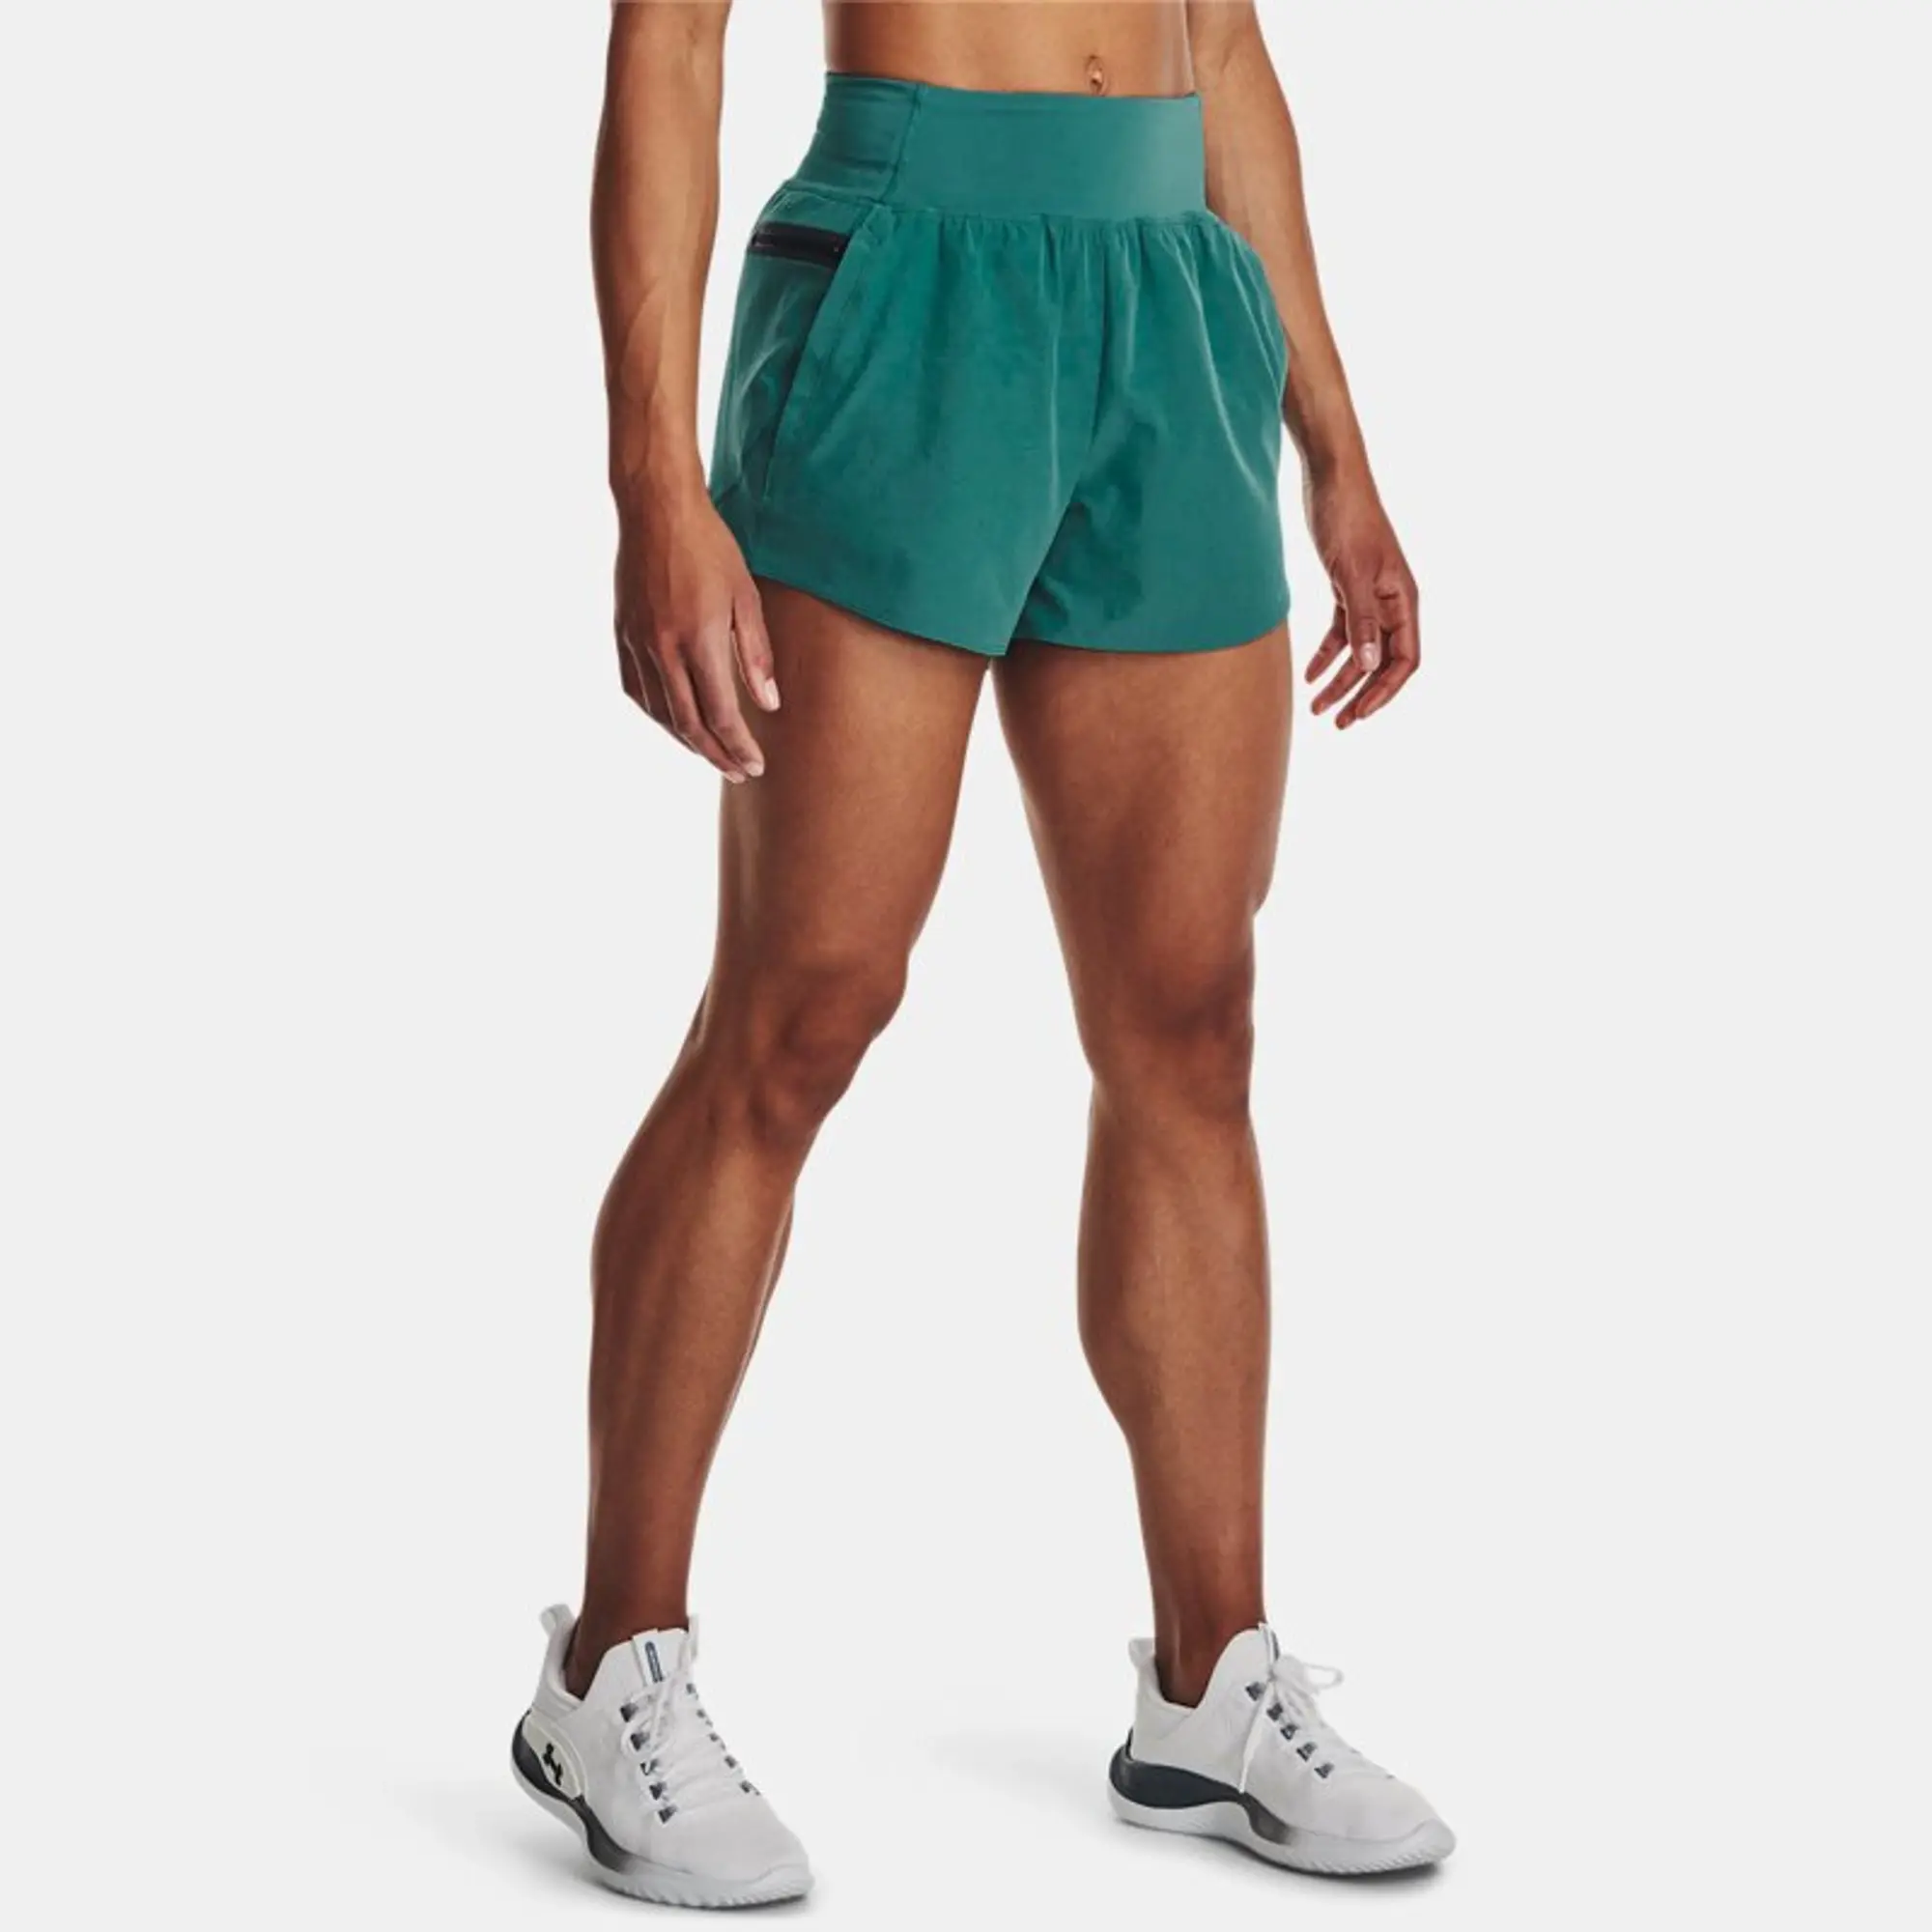 Under Armour Flx Wv Shorts Ld99 - Green